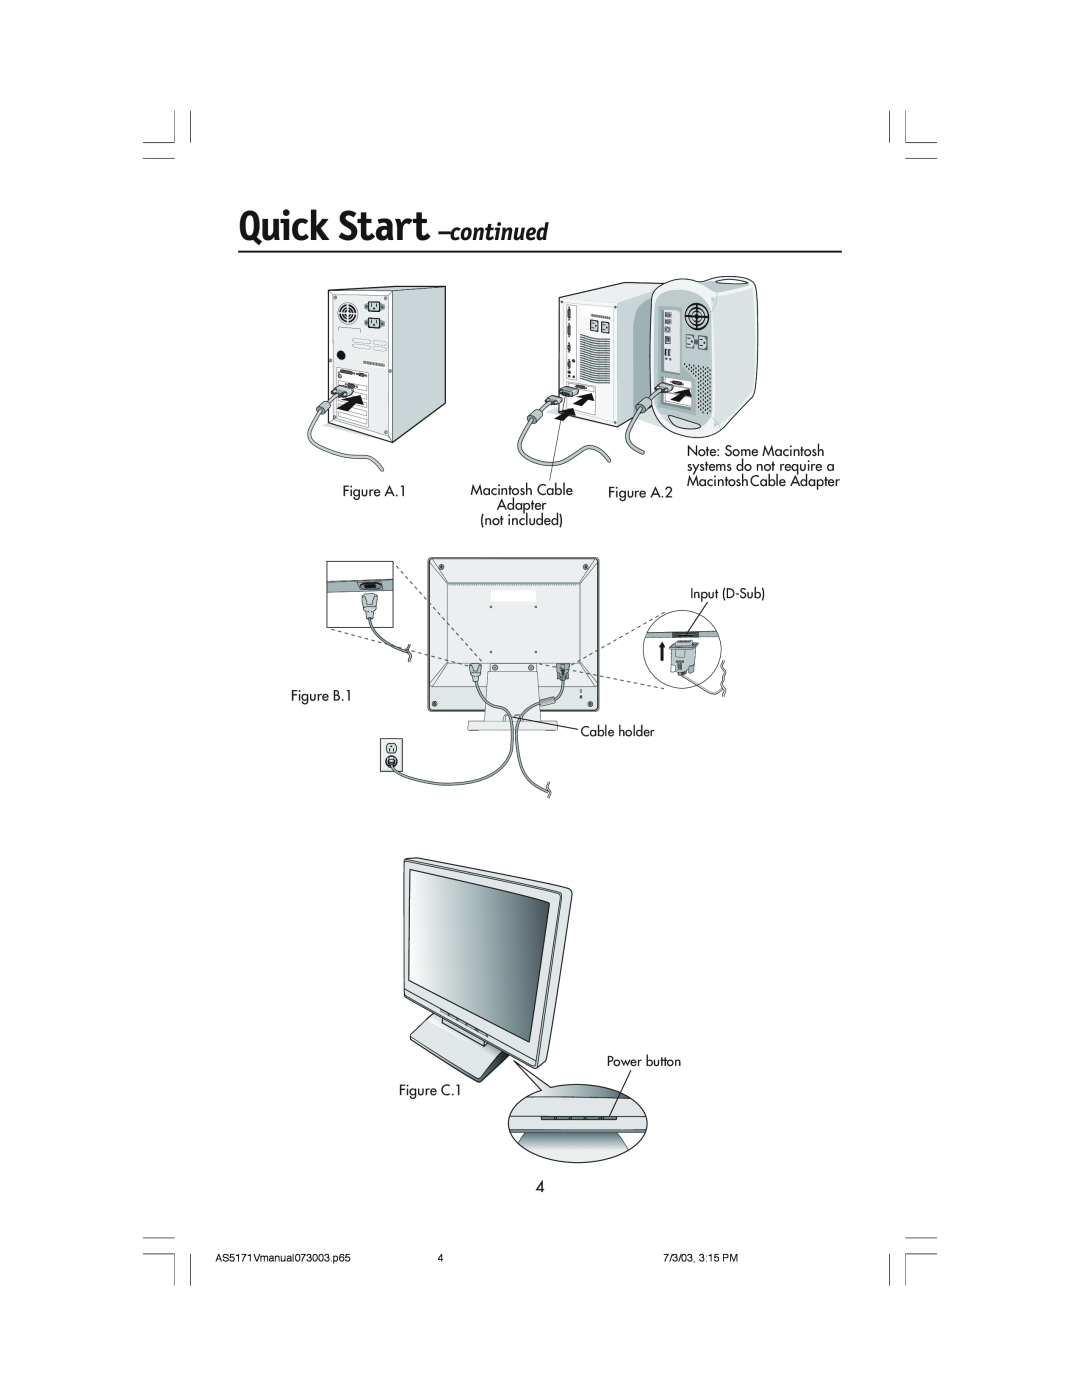 NEC LCD71V Quick Start -continued, Note Some Macintosh, Figure A.1, Figure A.2, Figure B.1, Figure C.1, 7/3/03, 315 PM 